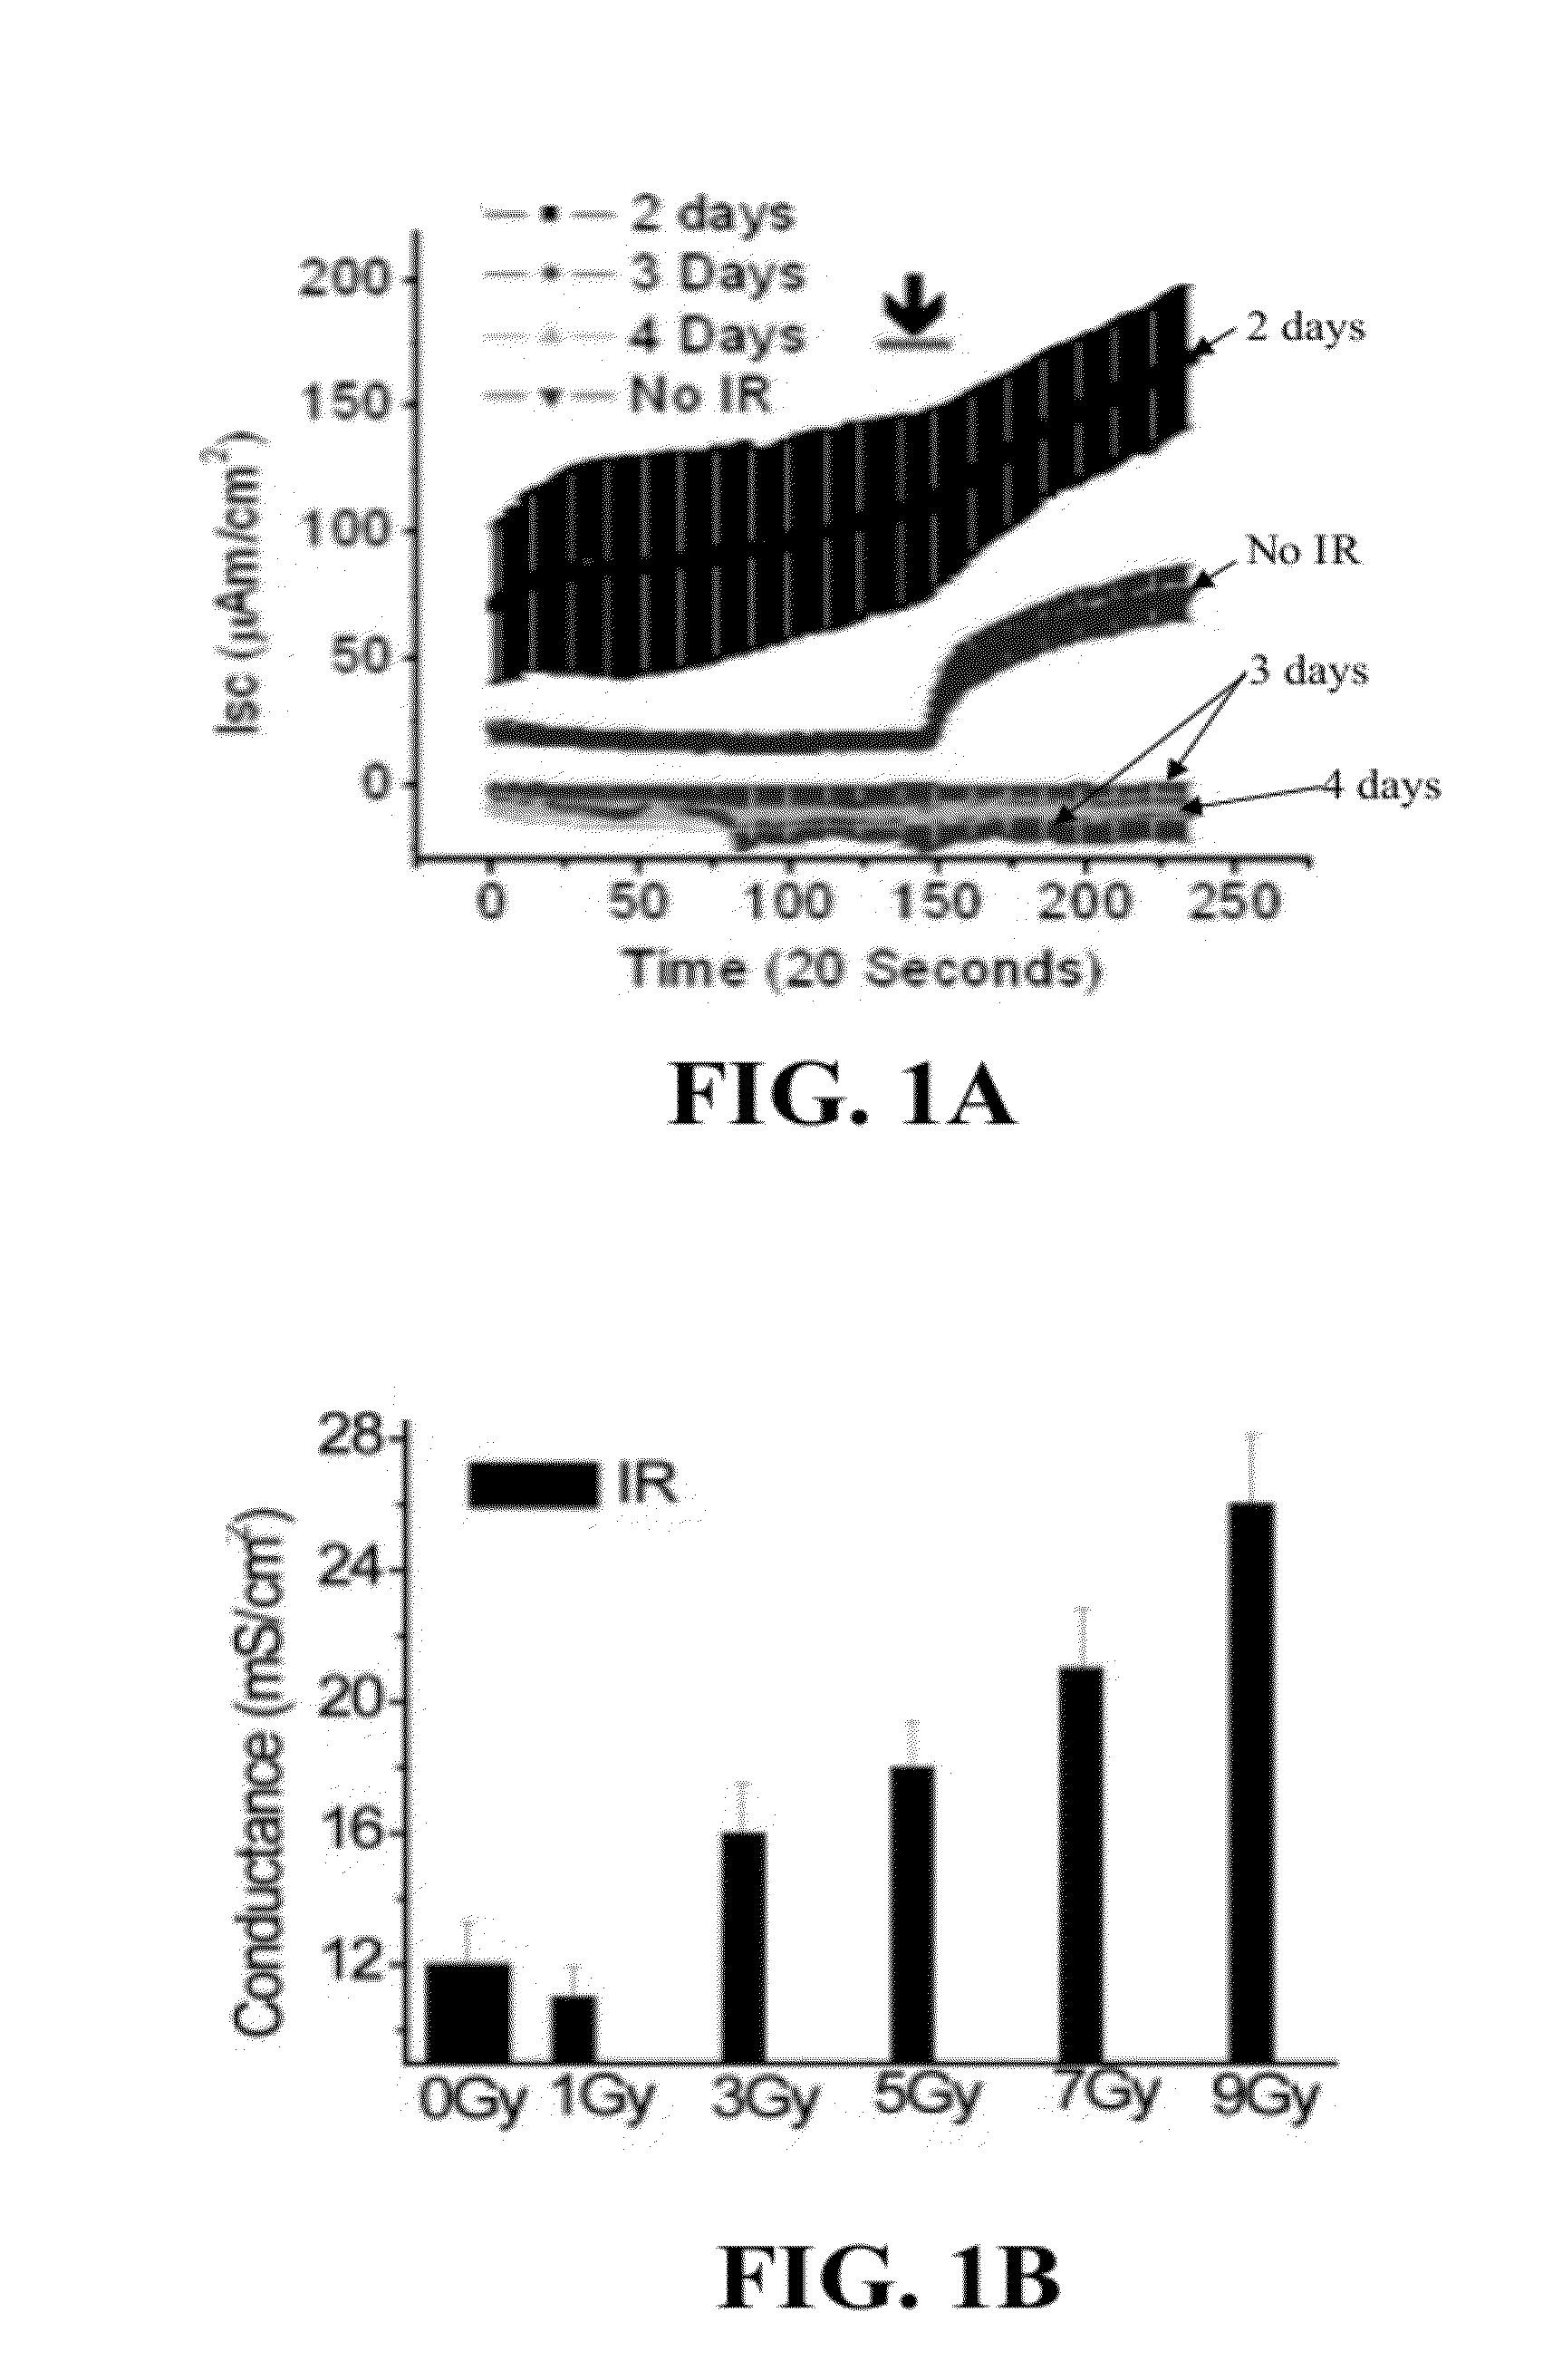 Materials and Methods for Improving Gastrointestinal Function